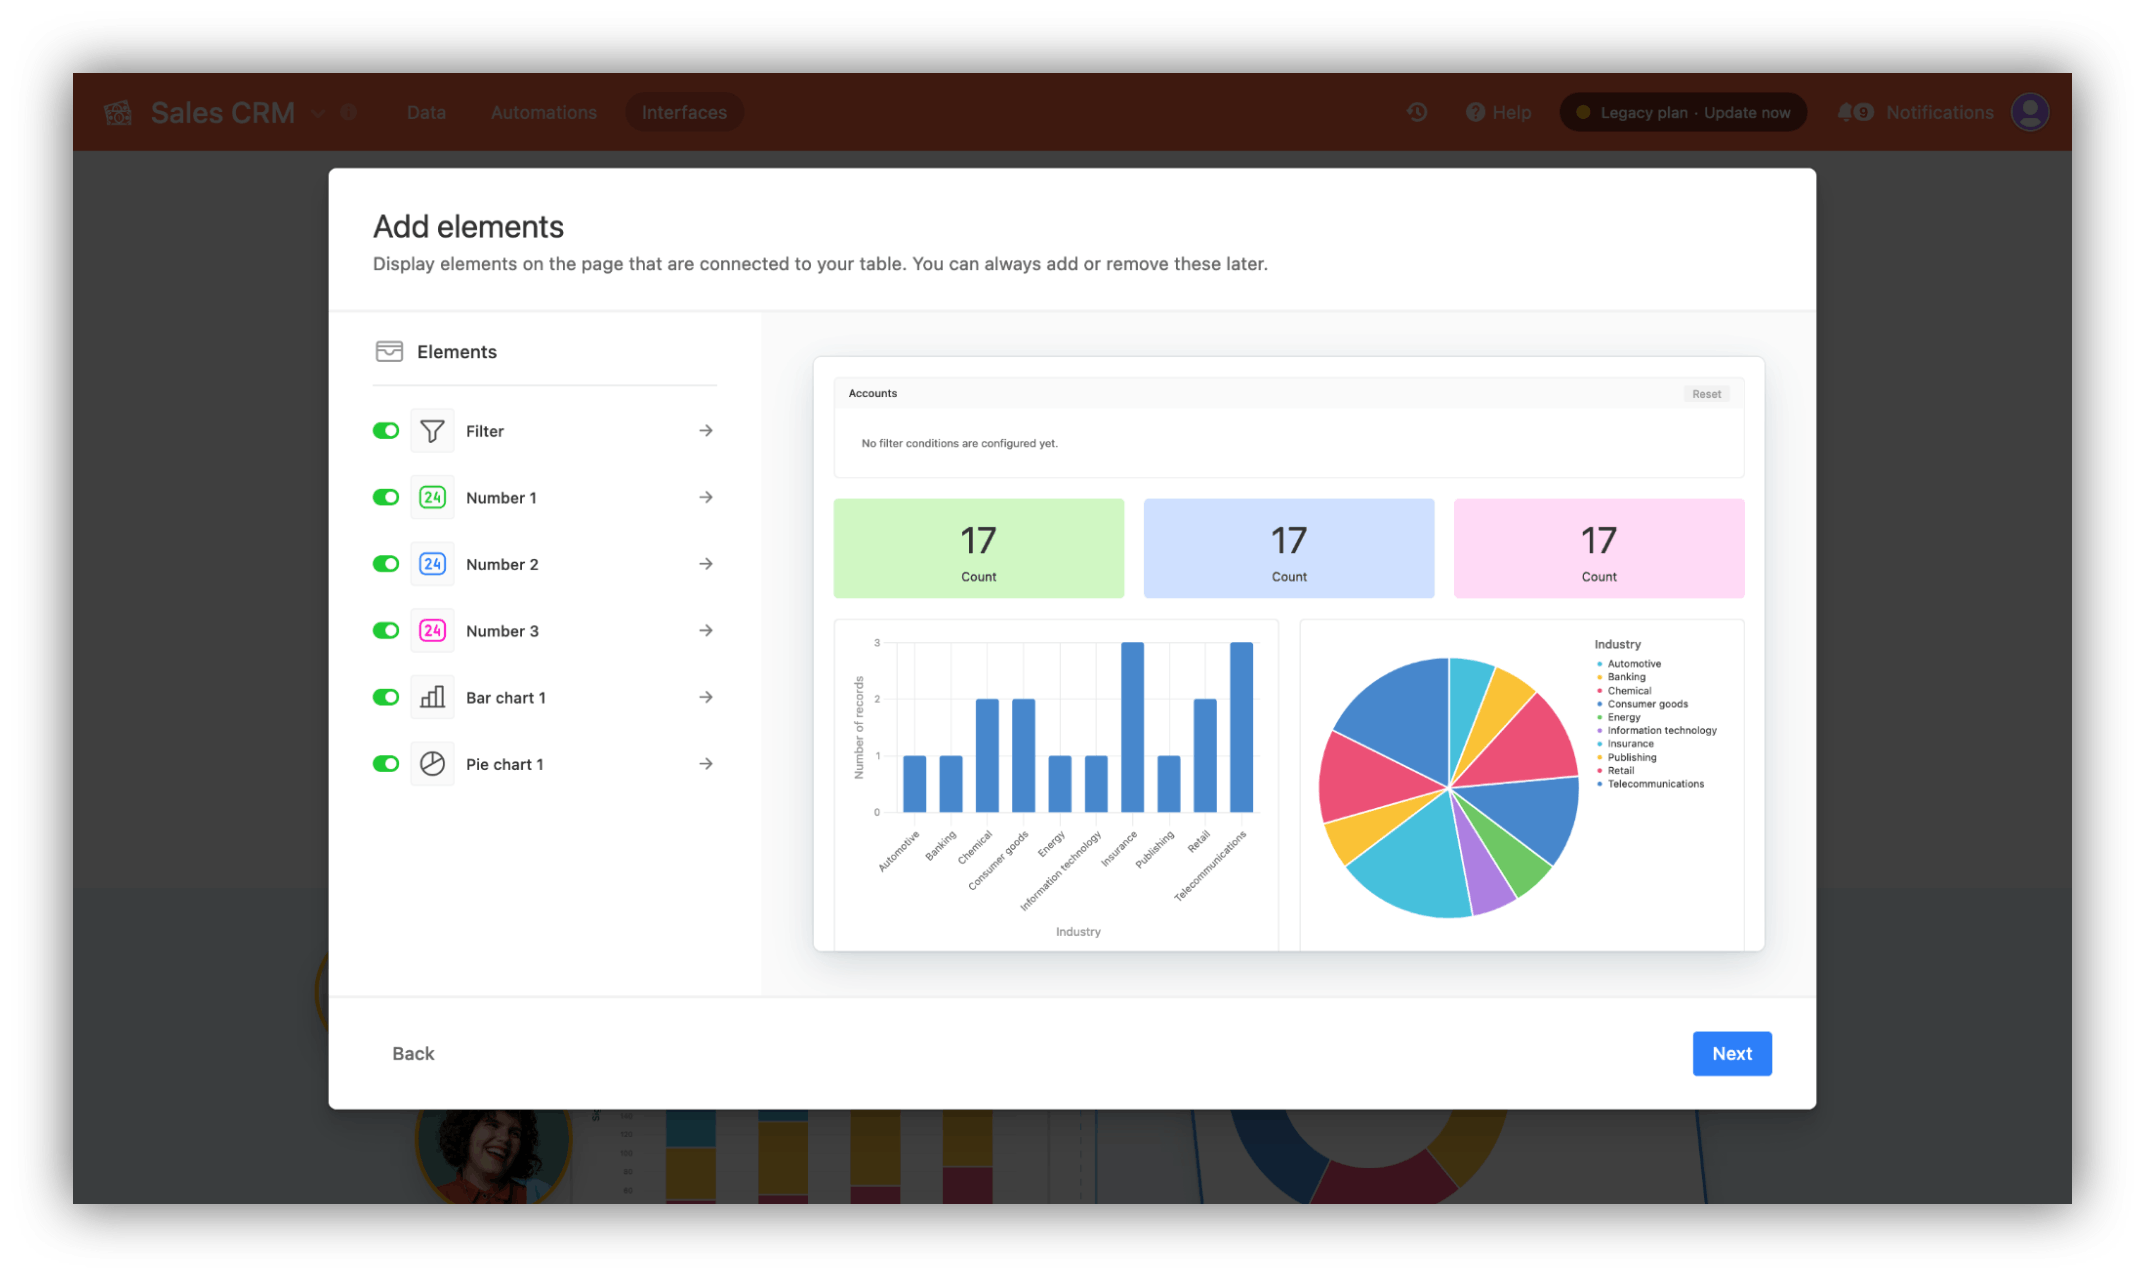 Select which elements you want in your dashboard